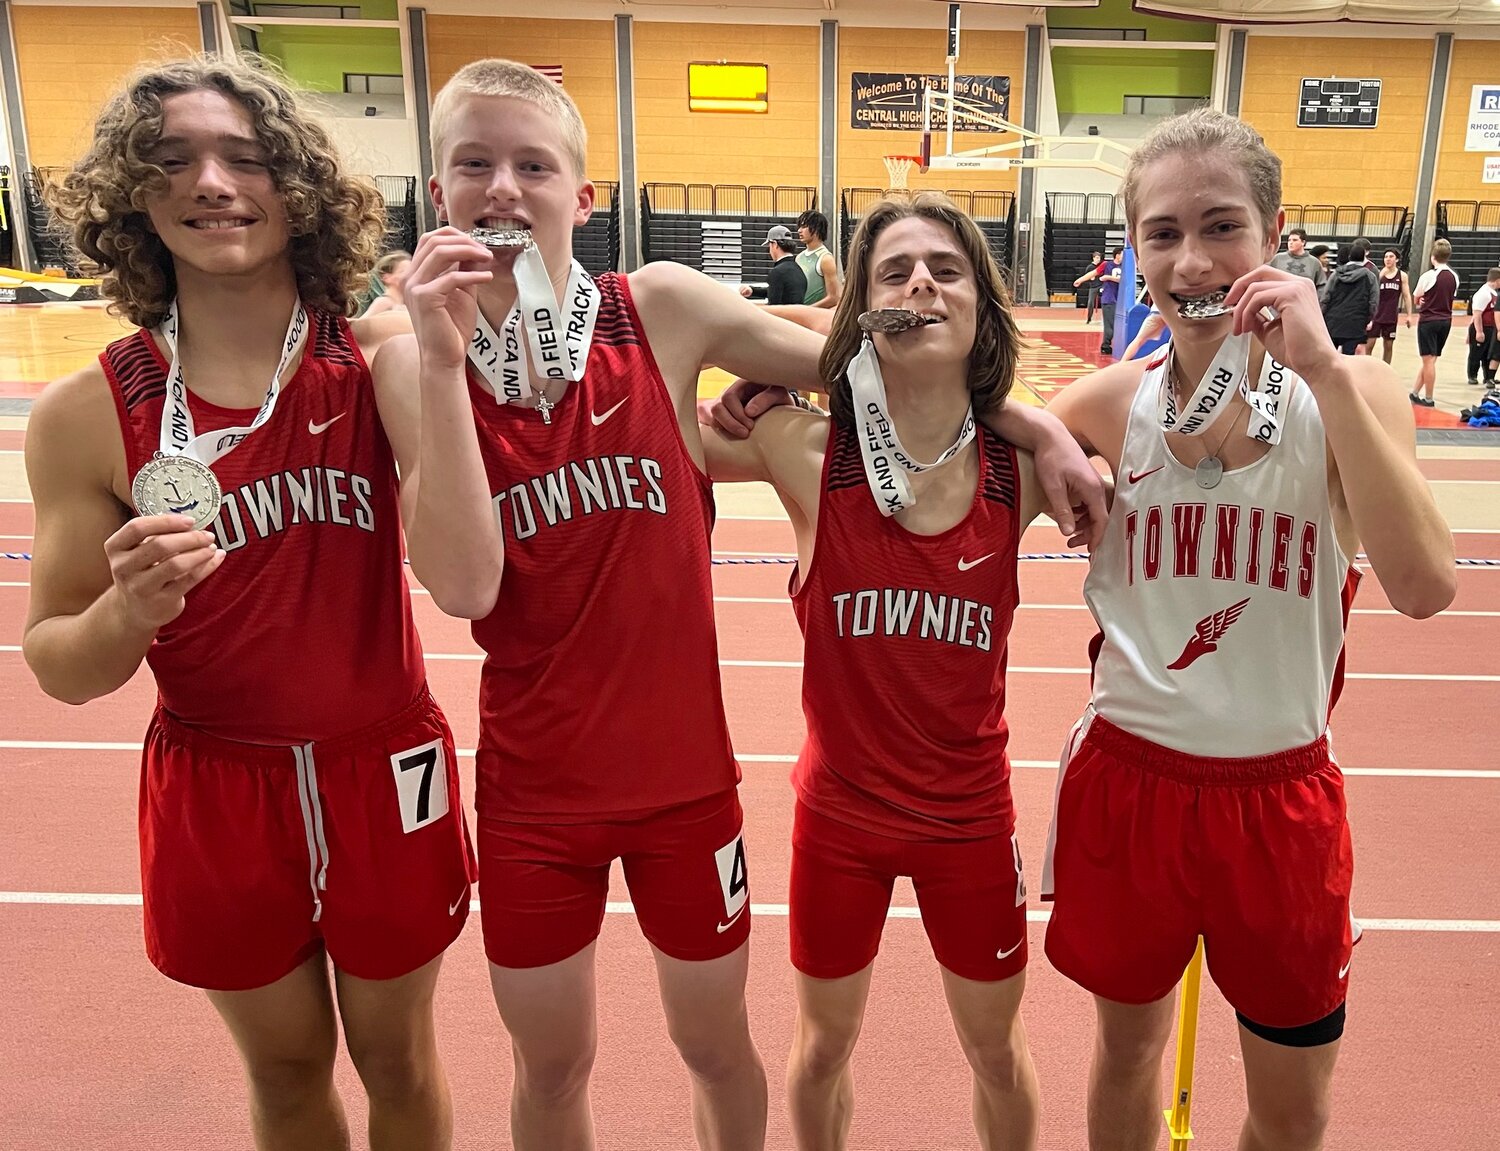 The EPHS 4x200 meter relay team of (left to right) Mac Prevete, Gerry Gagnon, Jack Pawlik and Gus Belanger placed third at freshmen state Tuesday, Feb. 6.